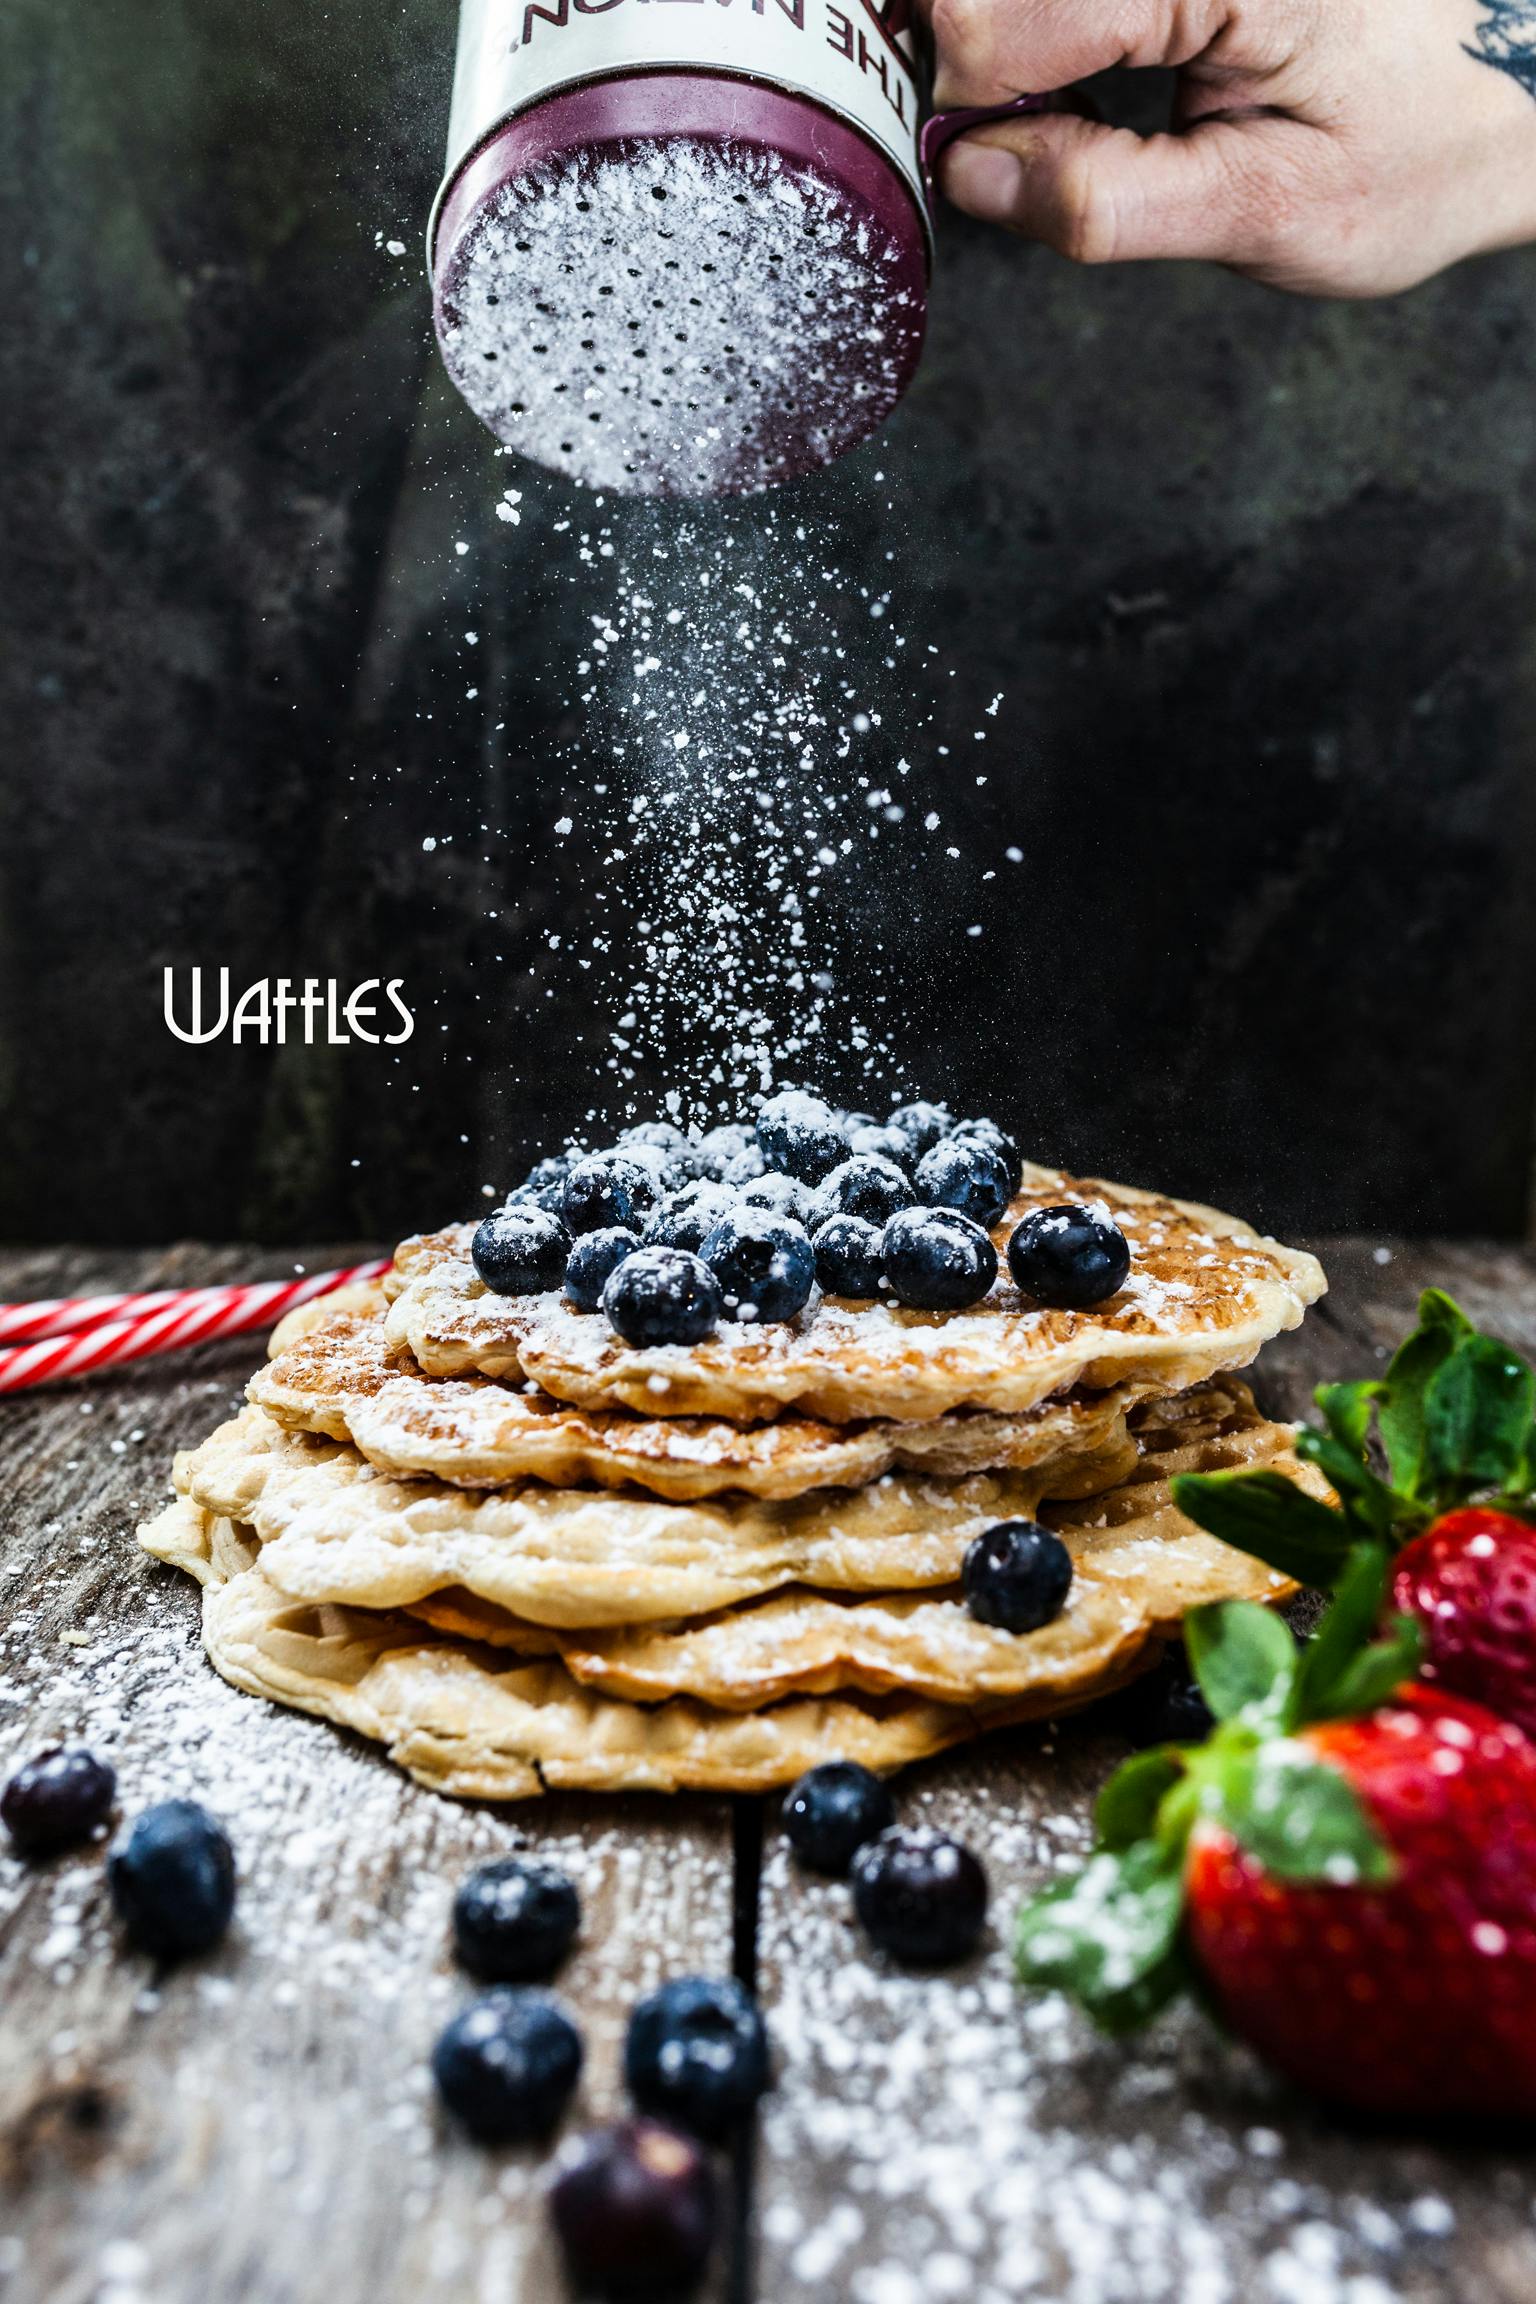 freshly prepared waffles with blueberries as topping, coated by icing sugar